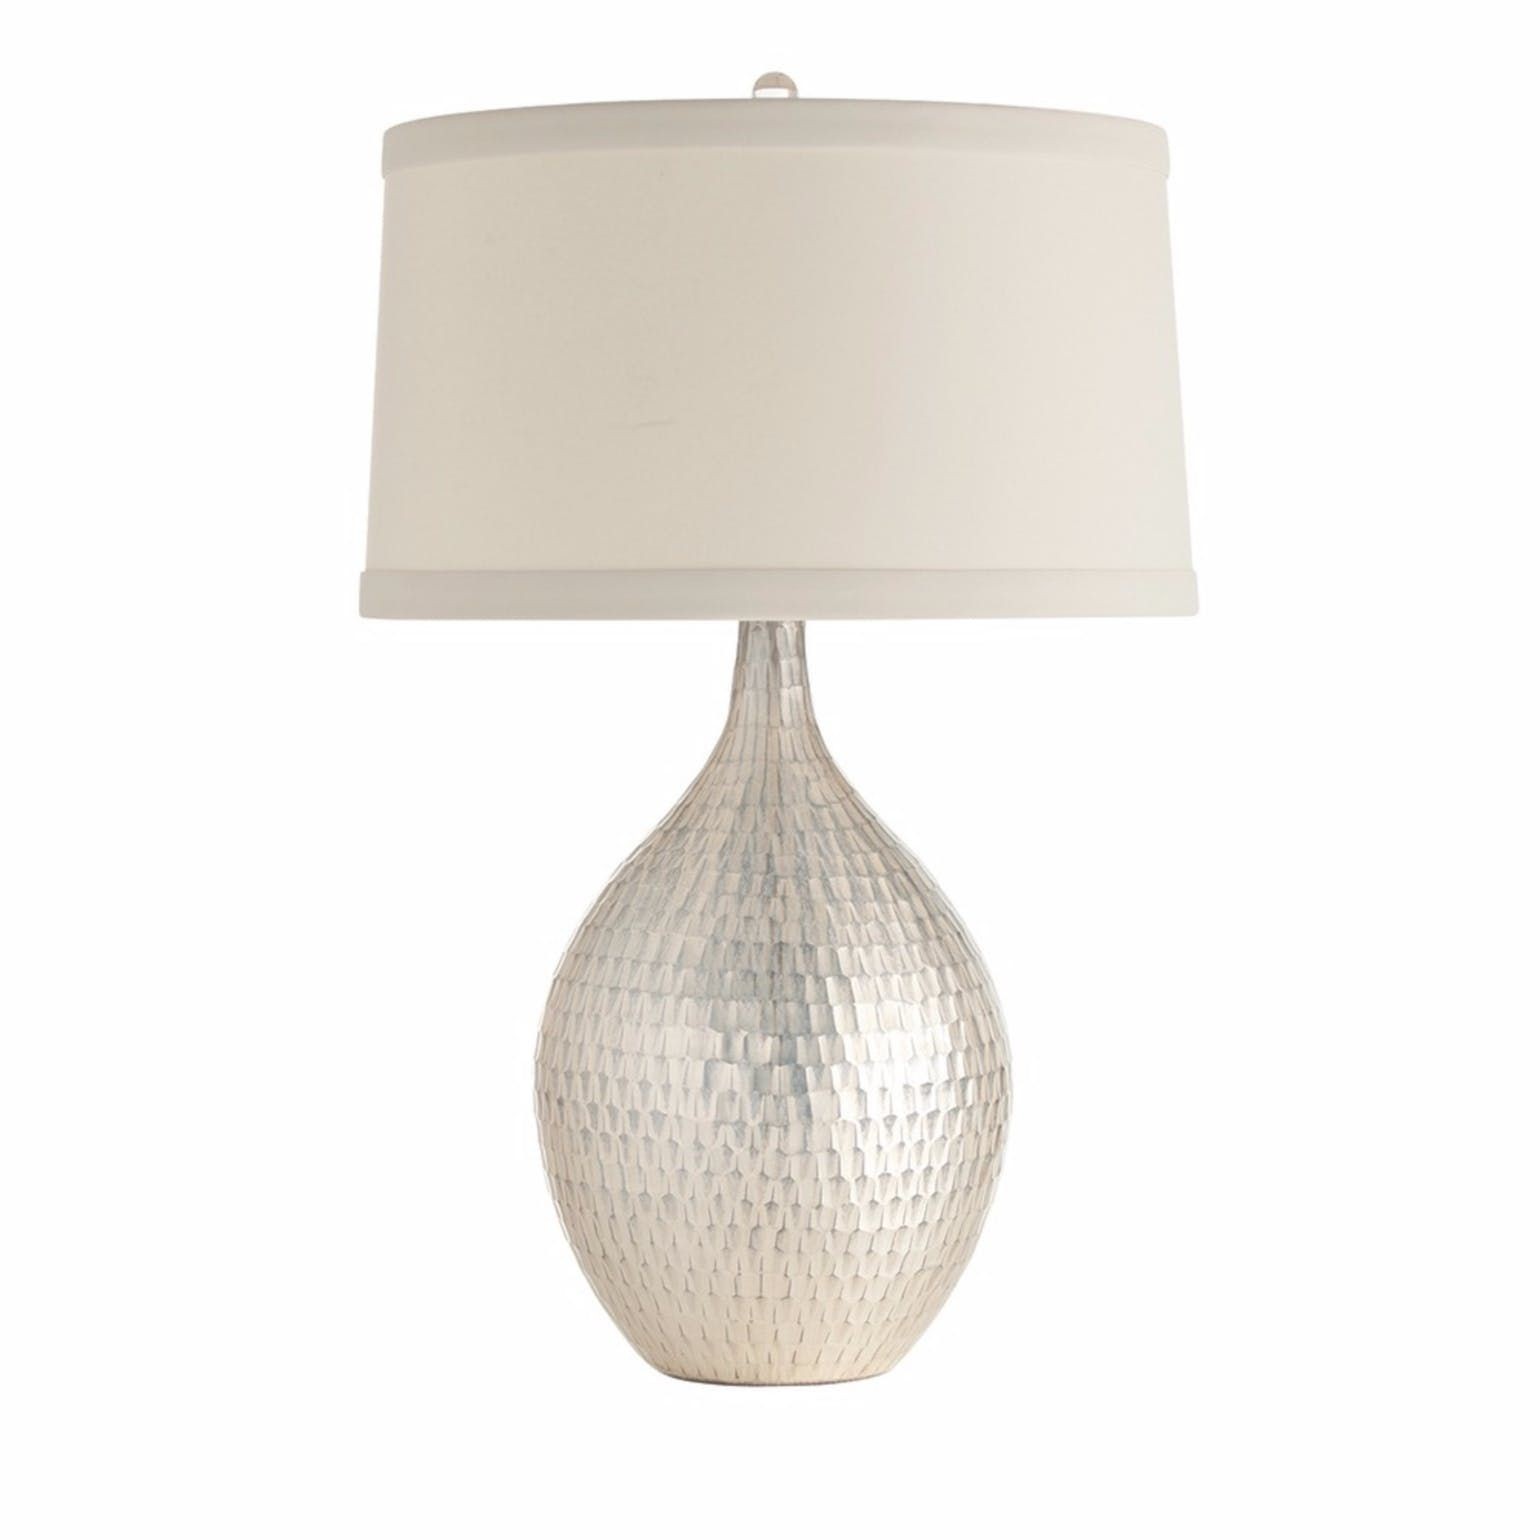 Walter lamp contemporary table lamps